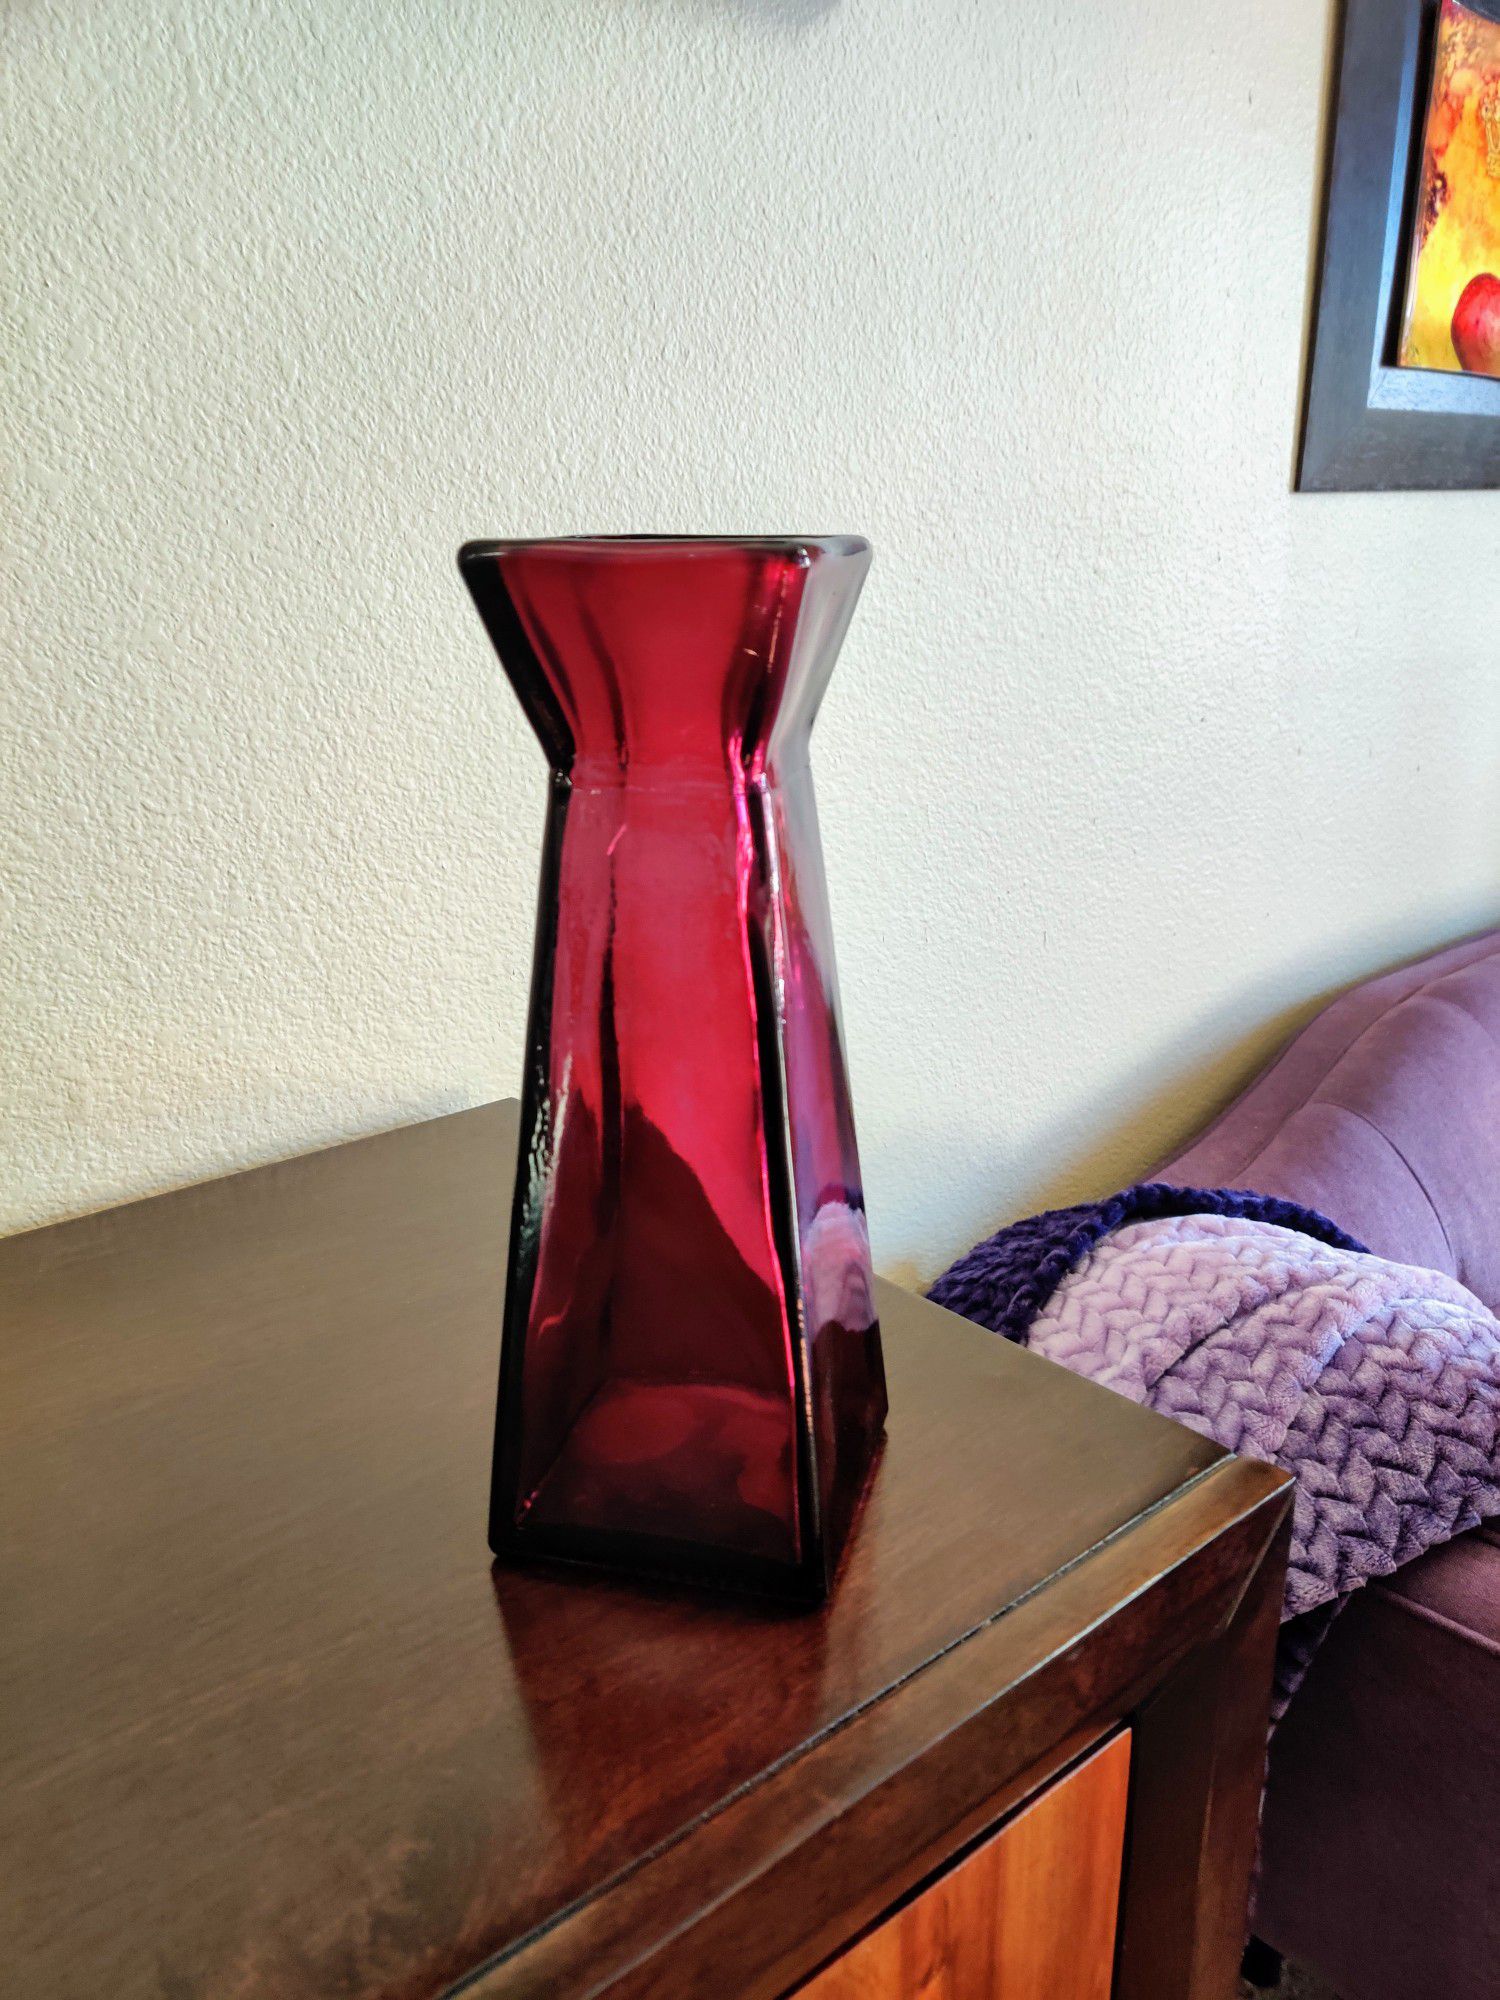 Handmade vase, made in Spain of recycled glass